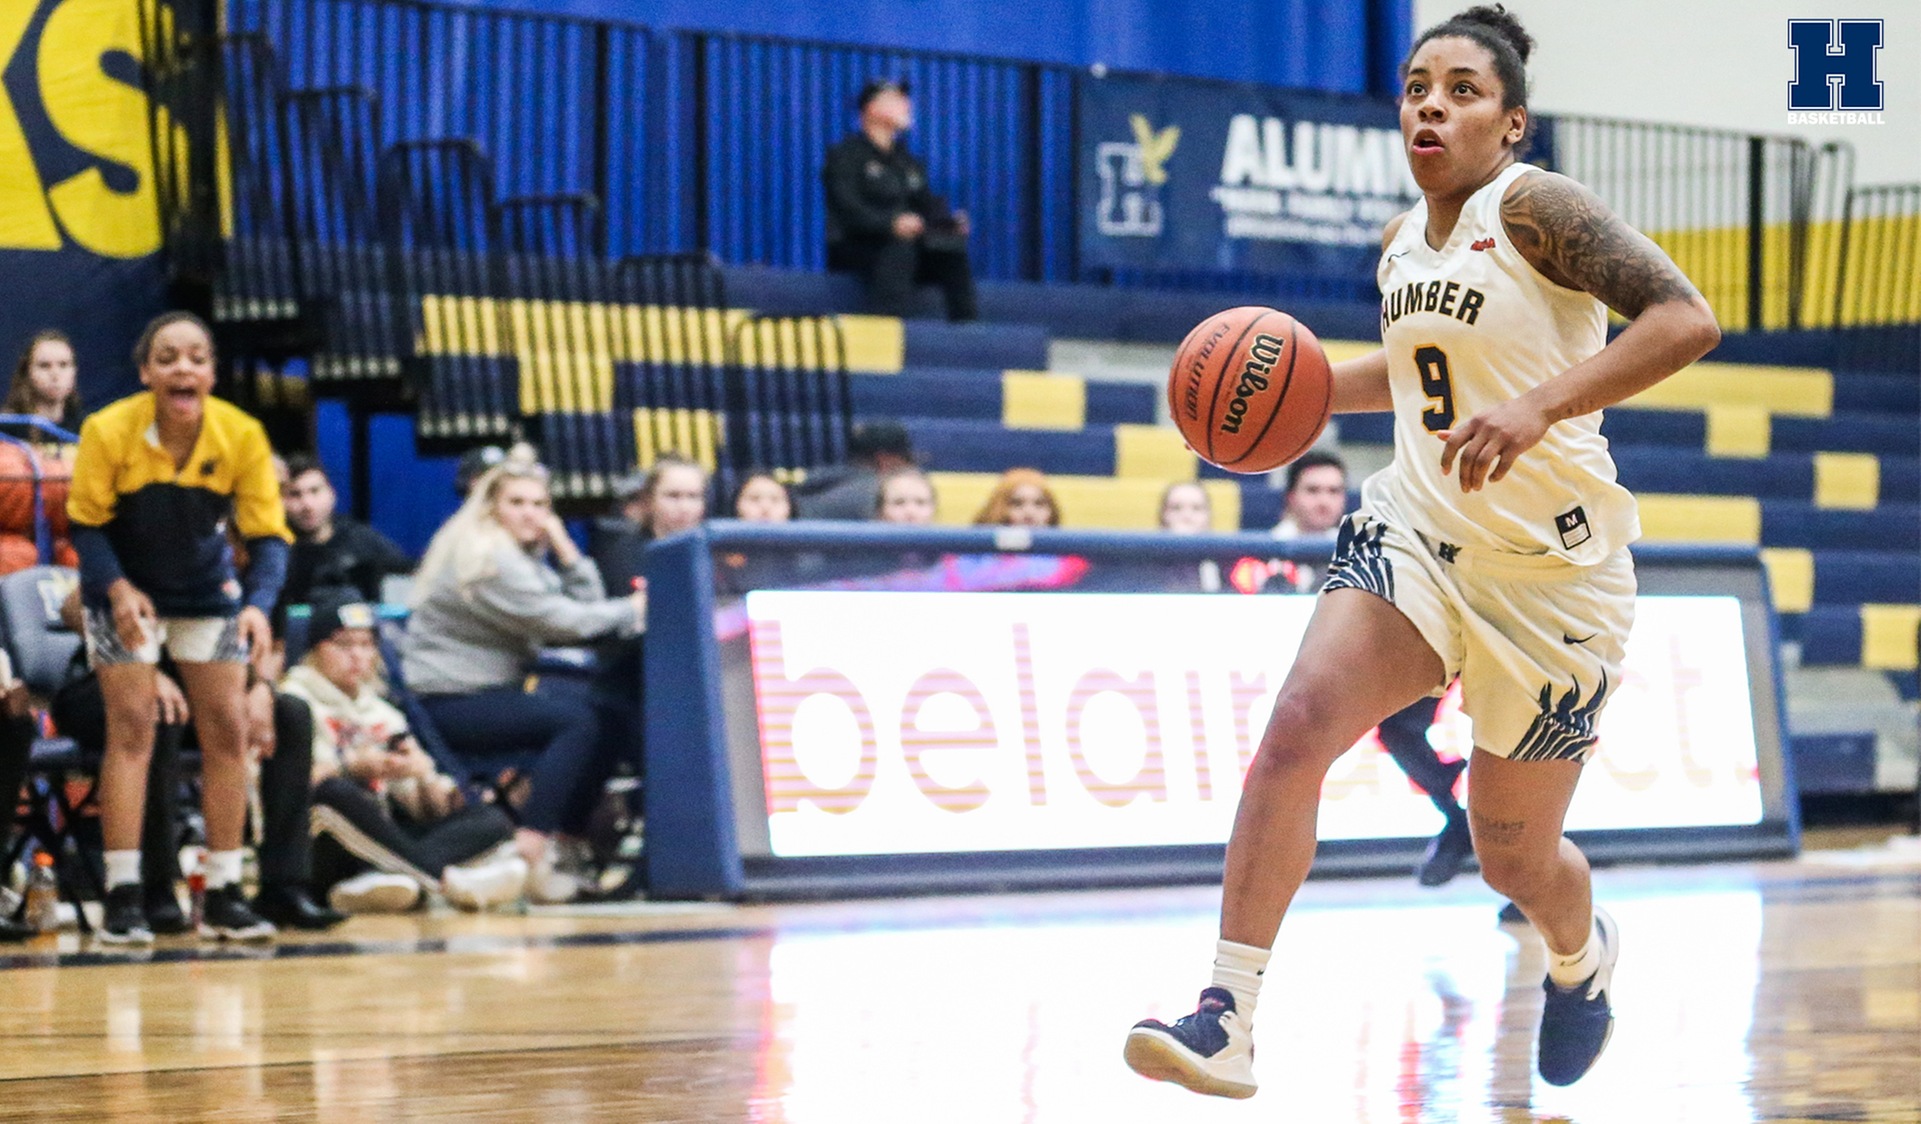 No. 3 Women's Basketball Starts Weekend With Win Over Sault, 96-46